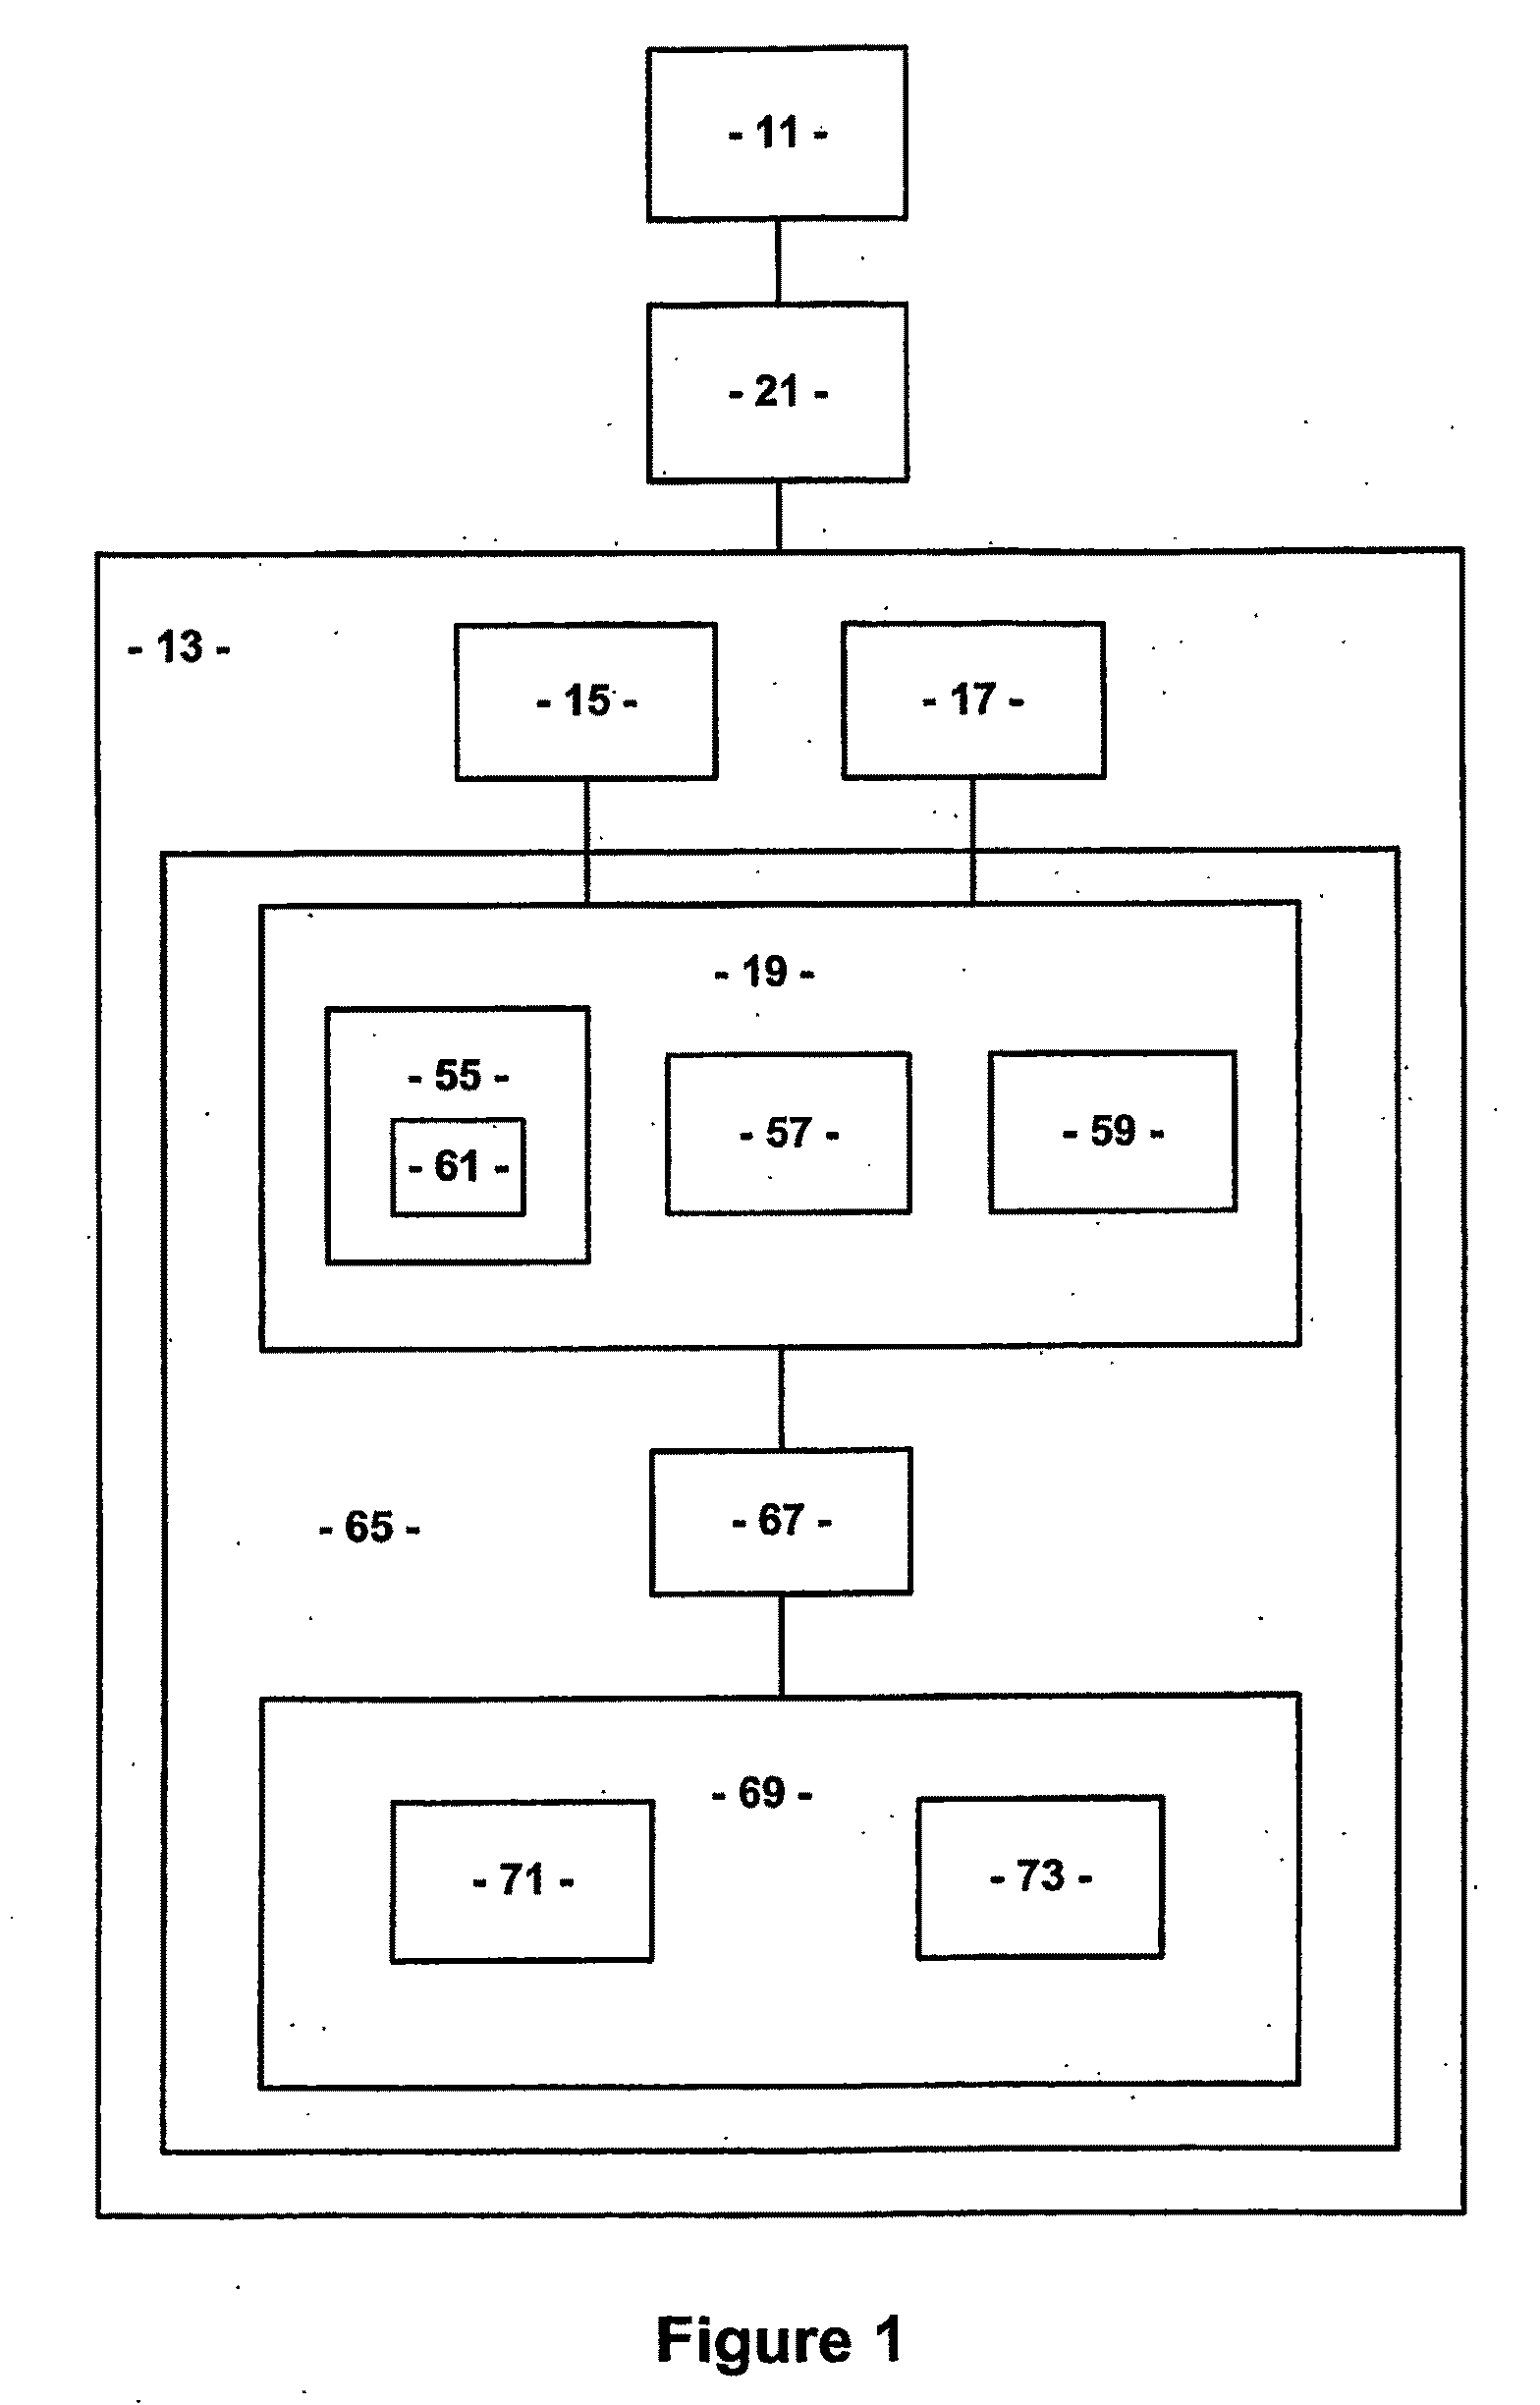 System and method for measuring and mapping a surface relative to a reference